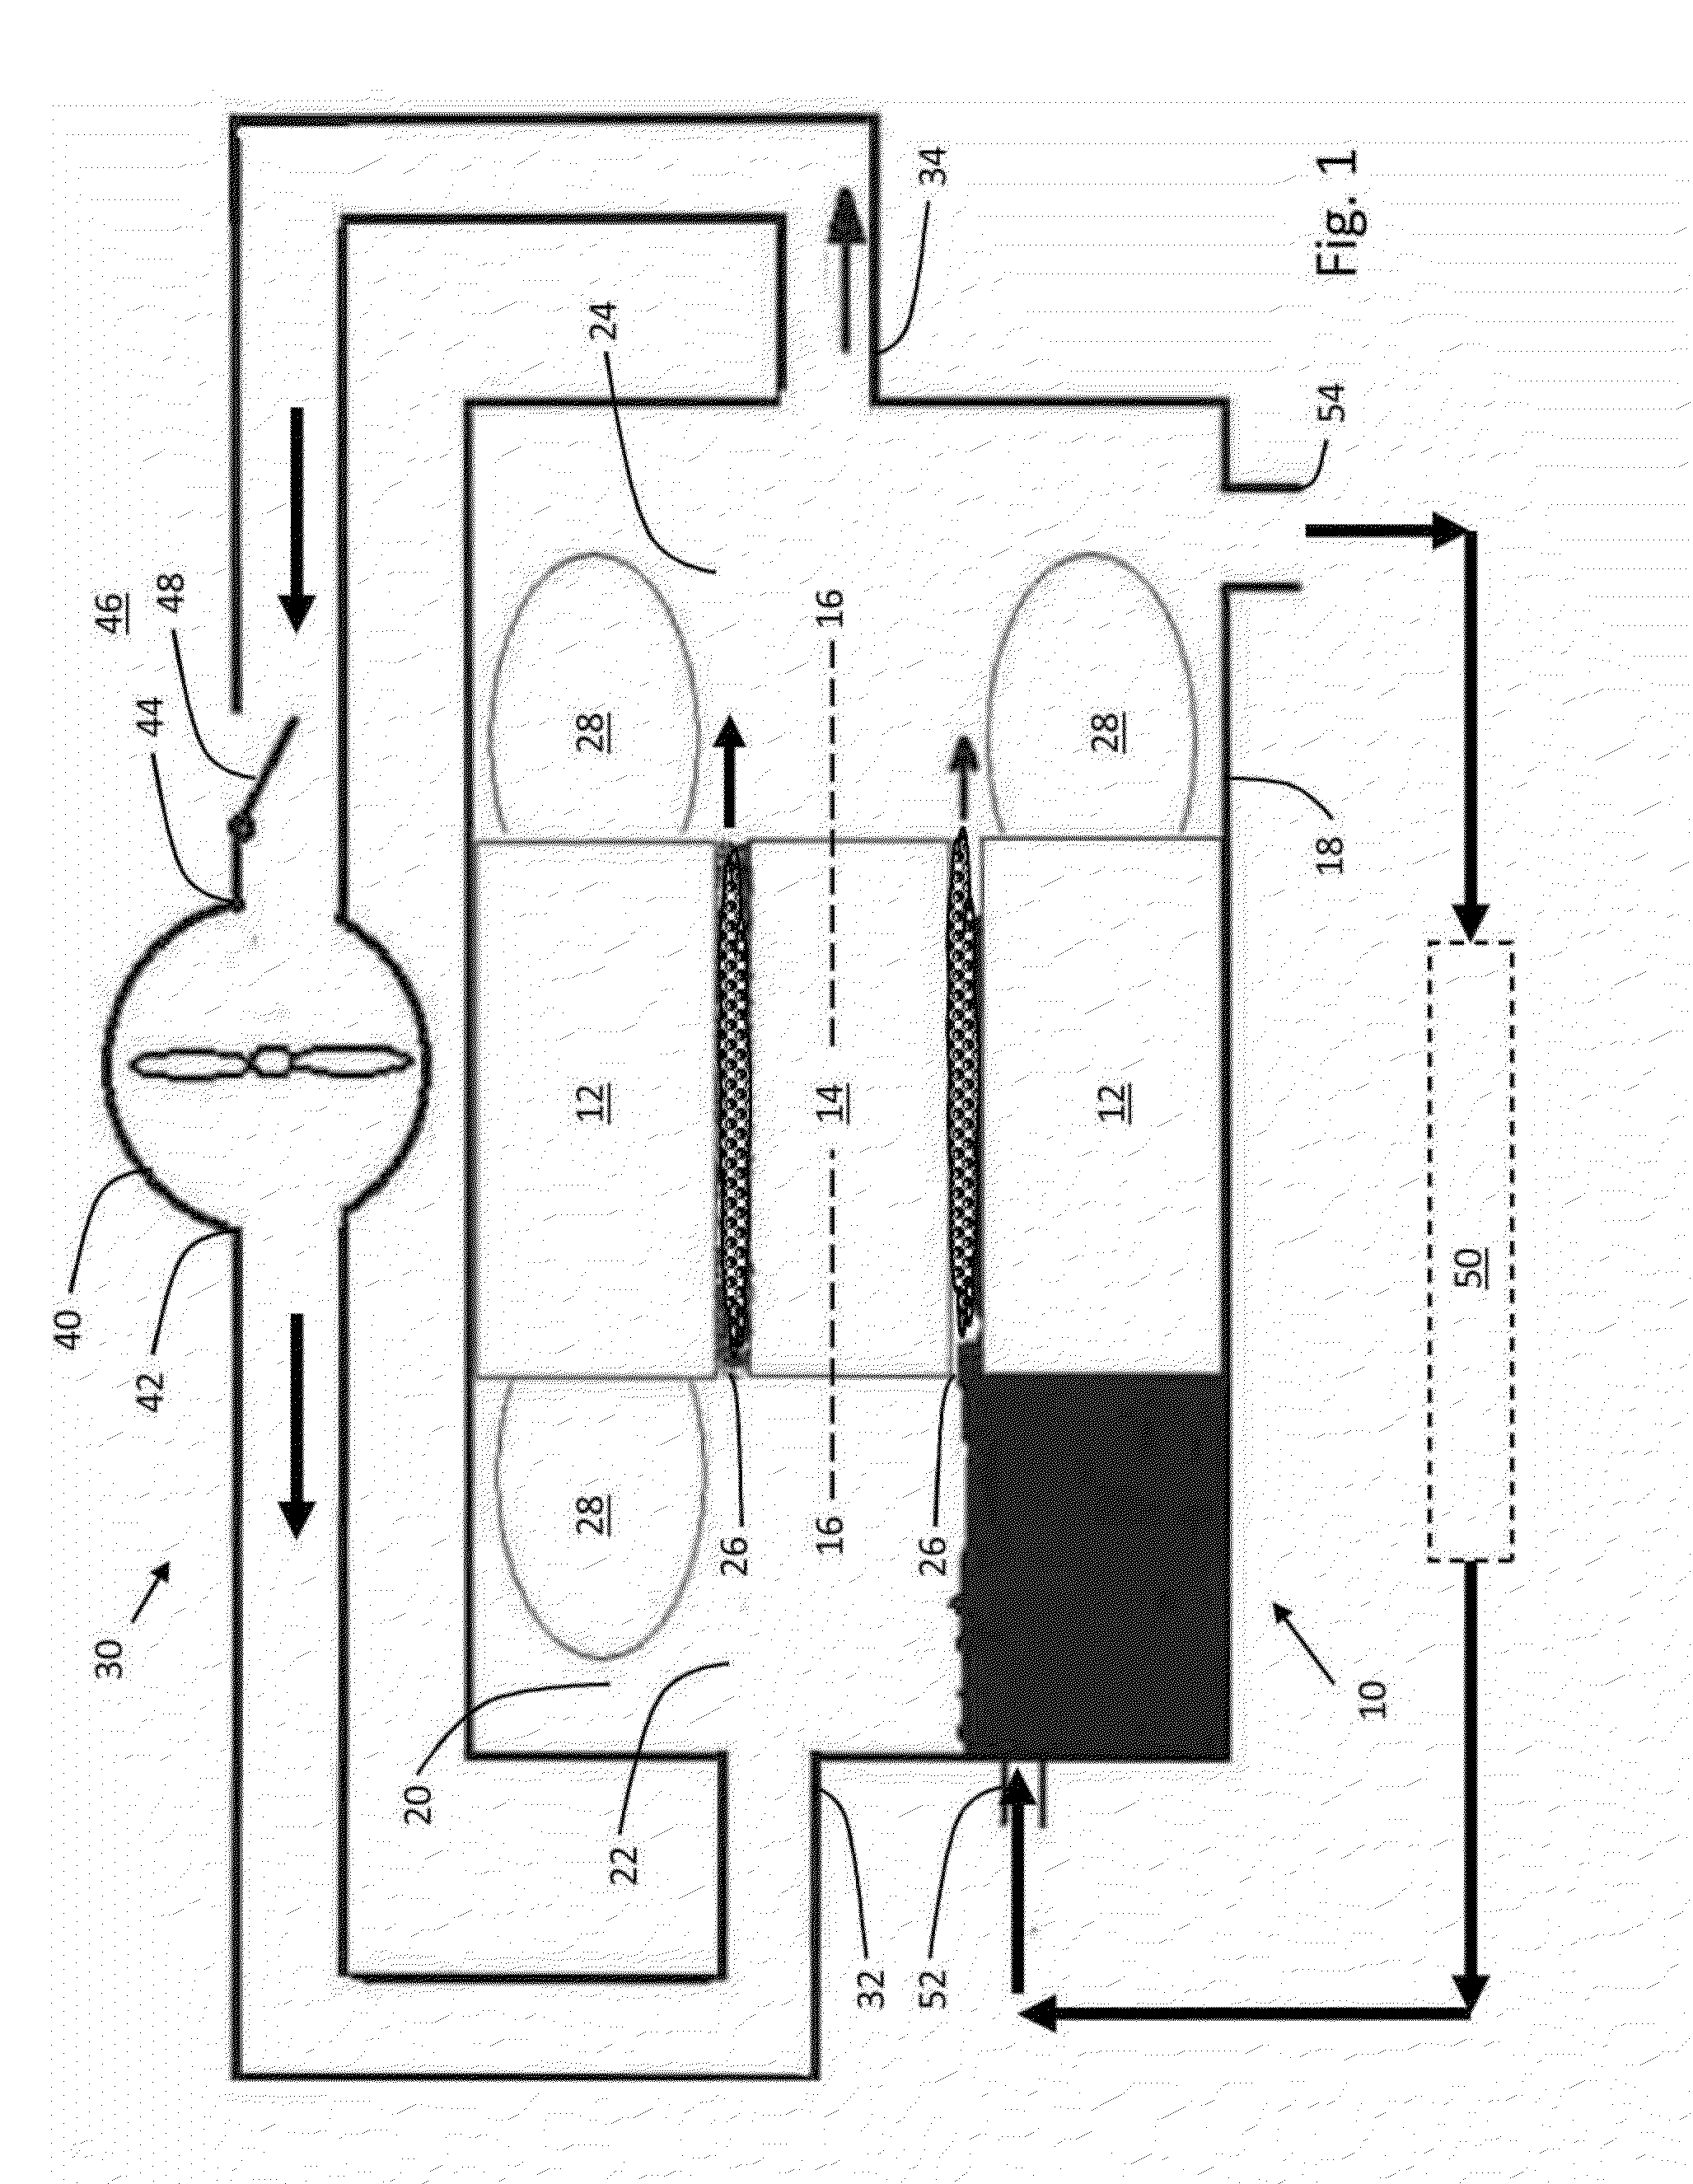 Two Phase Gap Cooling of an Electrical Machine